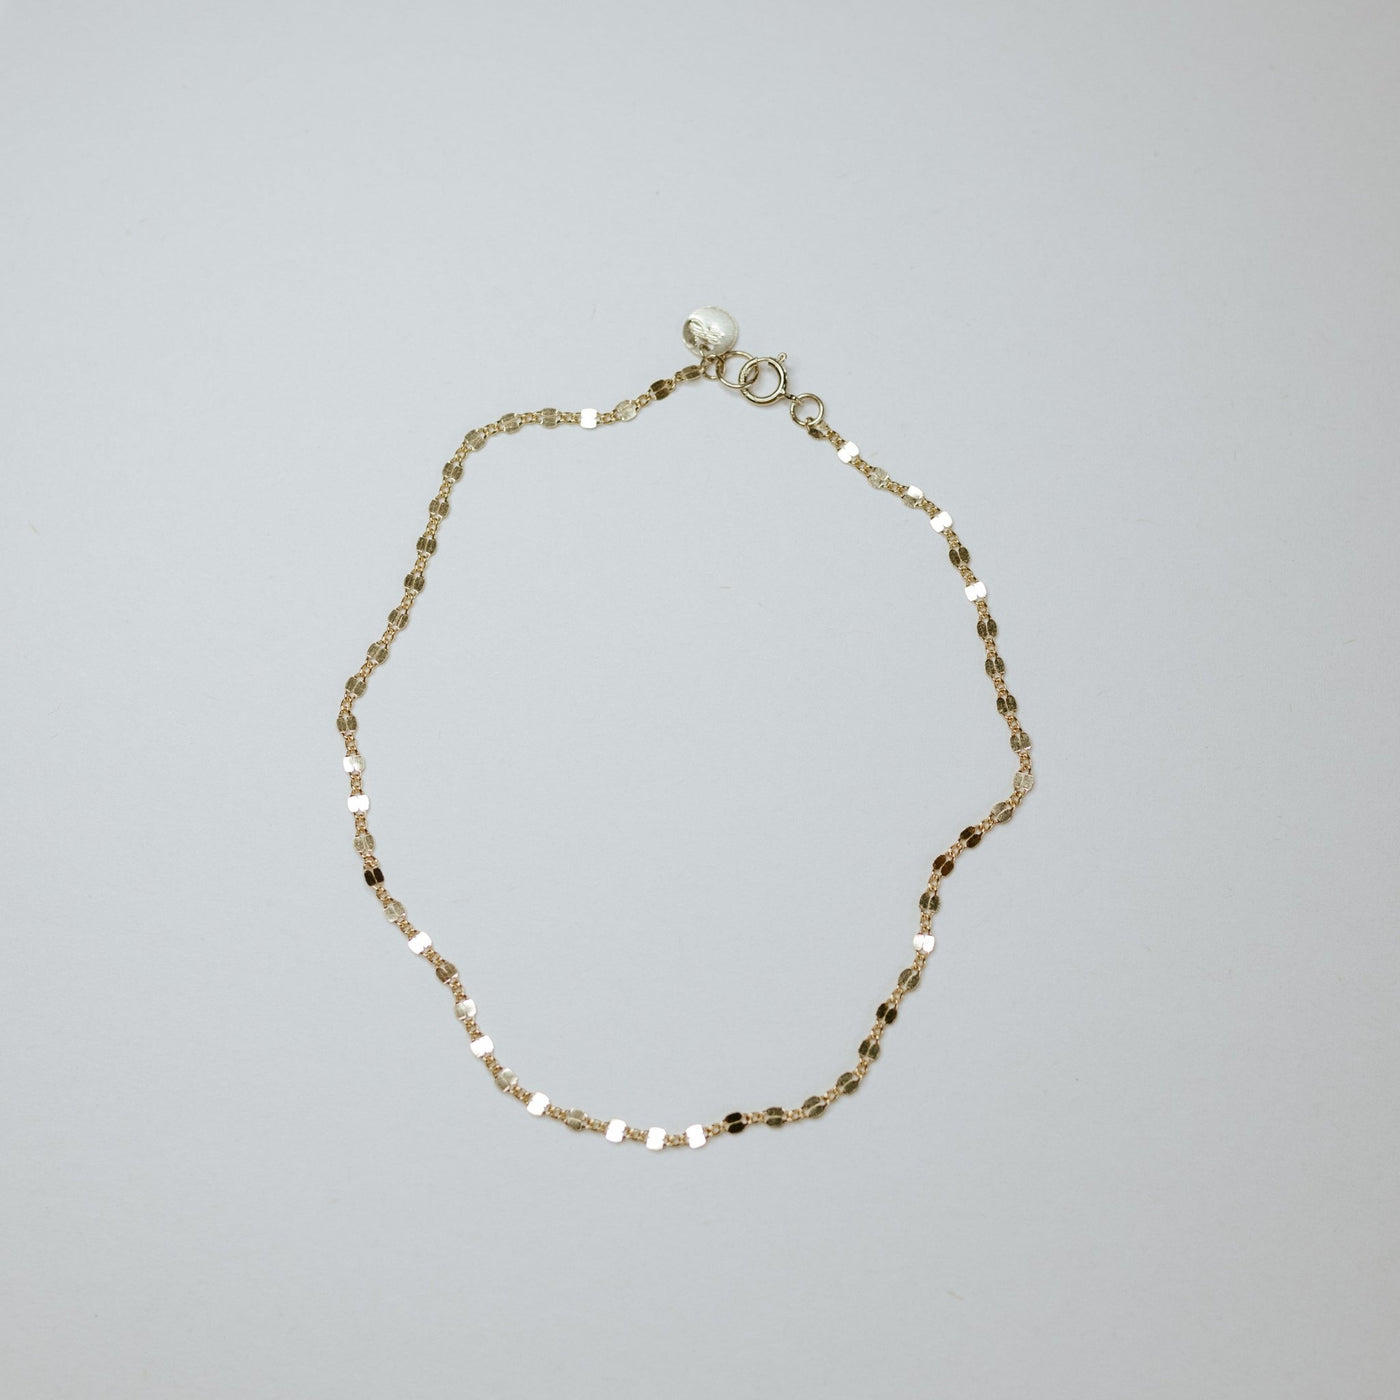 Admont Anklet - Jillian Leigh Jewellery - anklets